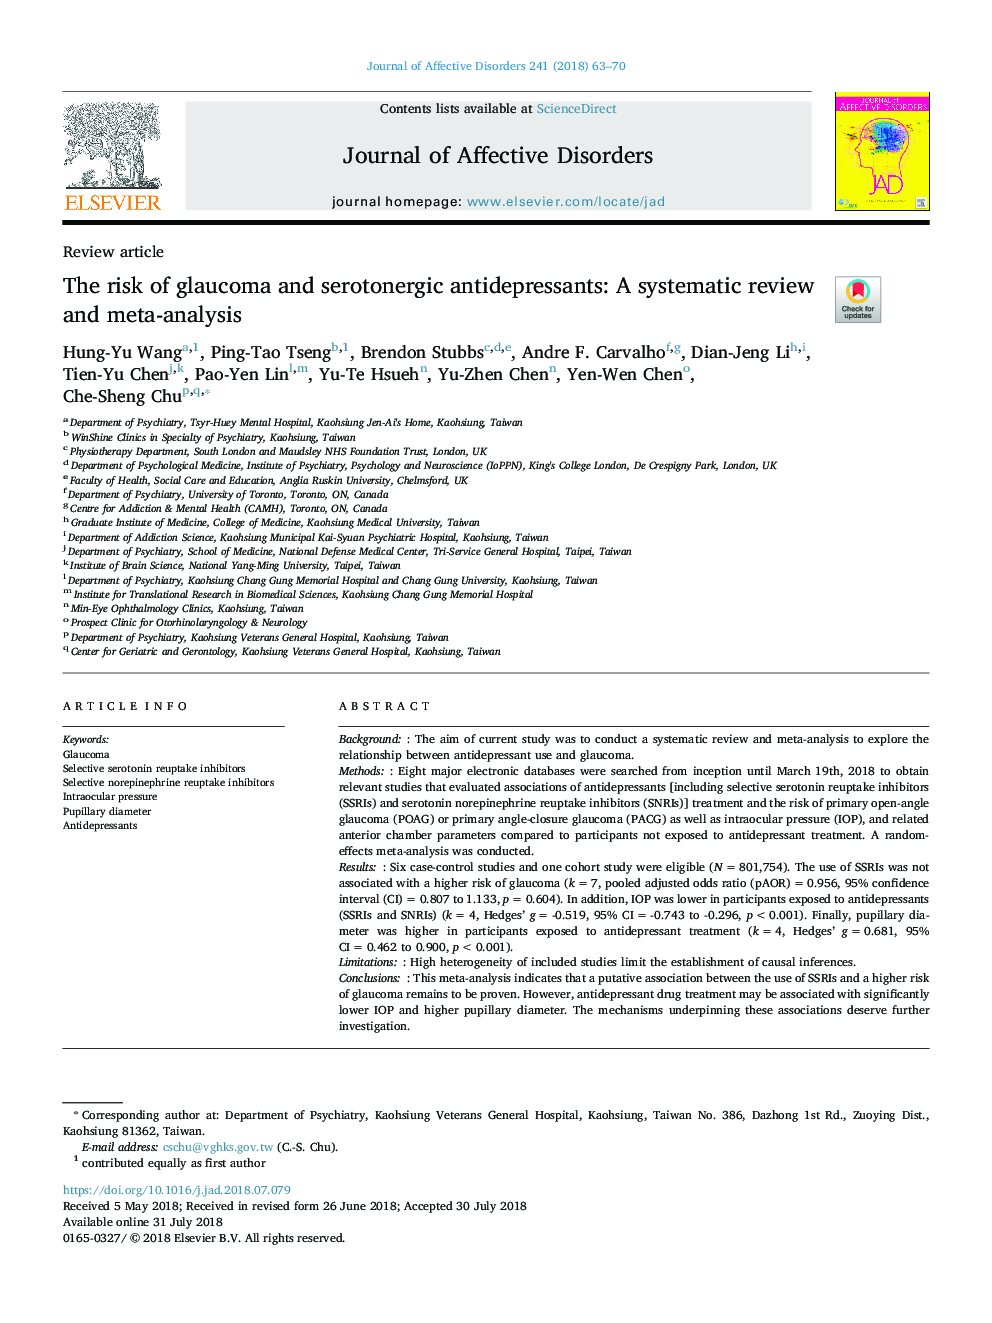 The risk of glaucoma and serotonergic antidepressants: A systematic review and meta-analysis